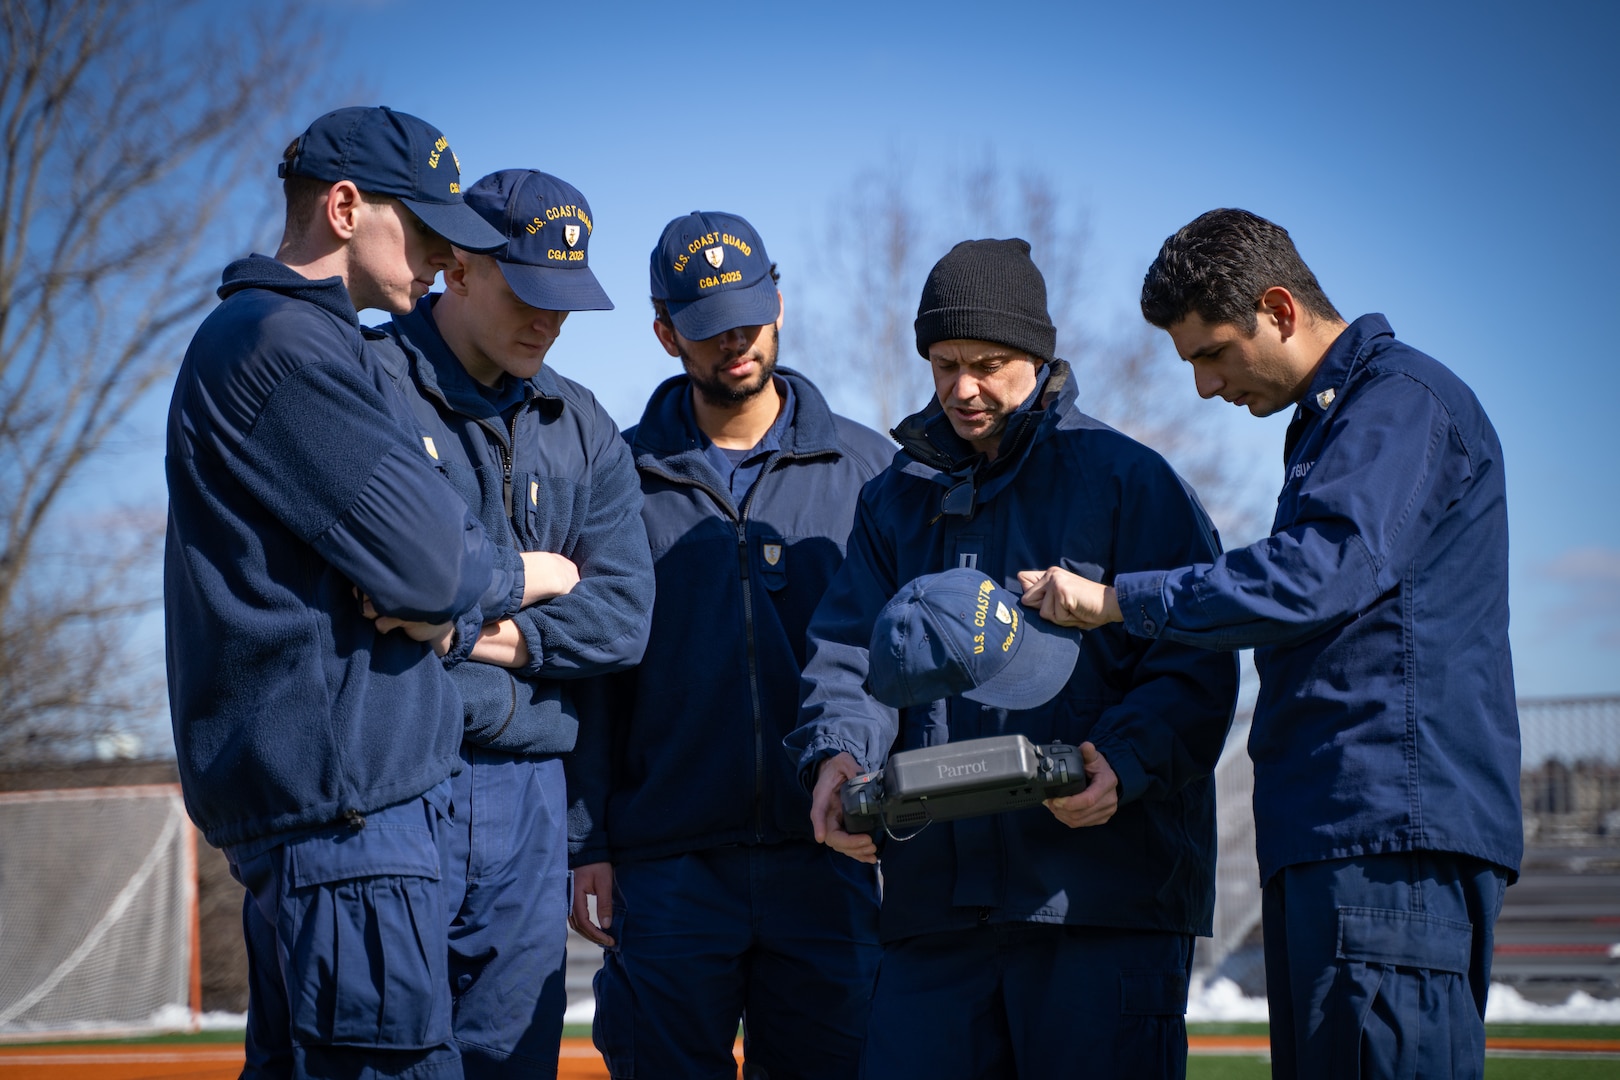 Lt. Kevin Deninger, Office of Aeronautical Engineering, demonstrates remote operations to cadets during a training course at the Coast Guard Academy, New London, Conn, Feb 21, 2023. The Coast Guard Short Ranged Unmanned Aerial Systems (SR-UAS) program is designed to create designated pilots and integrate drone capabilities into various missions. (U.S. Coast Guard photograph by Petty Officer 3rd Class Matt Thieme)